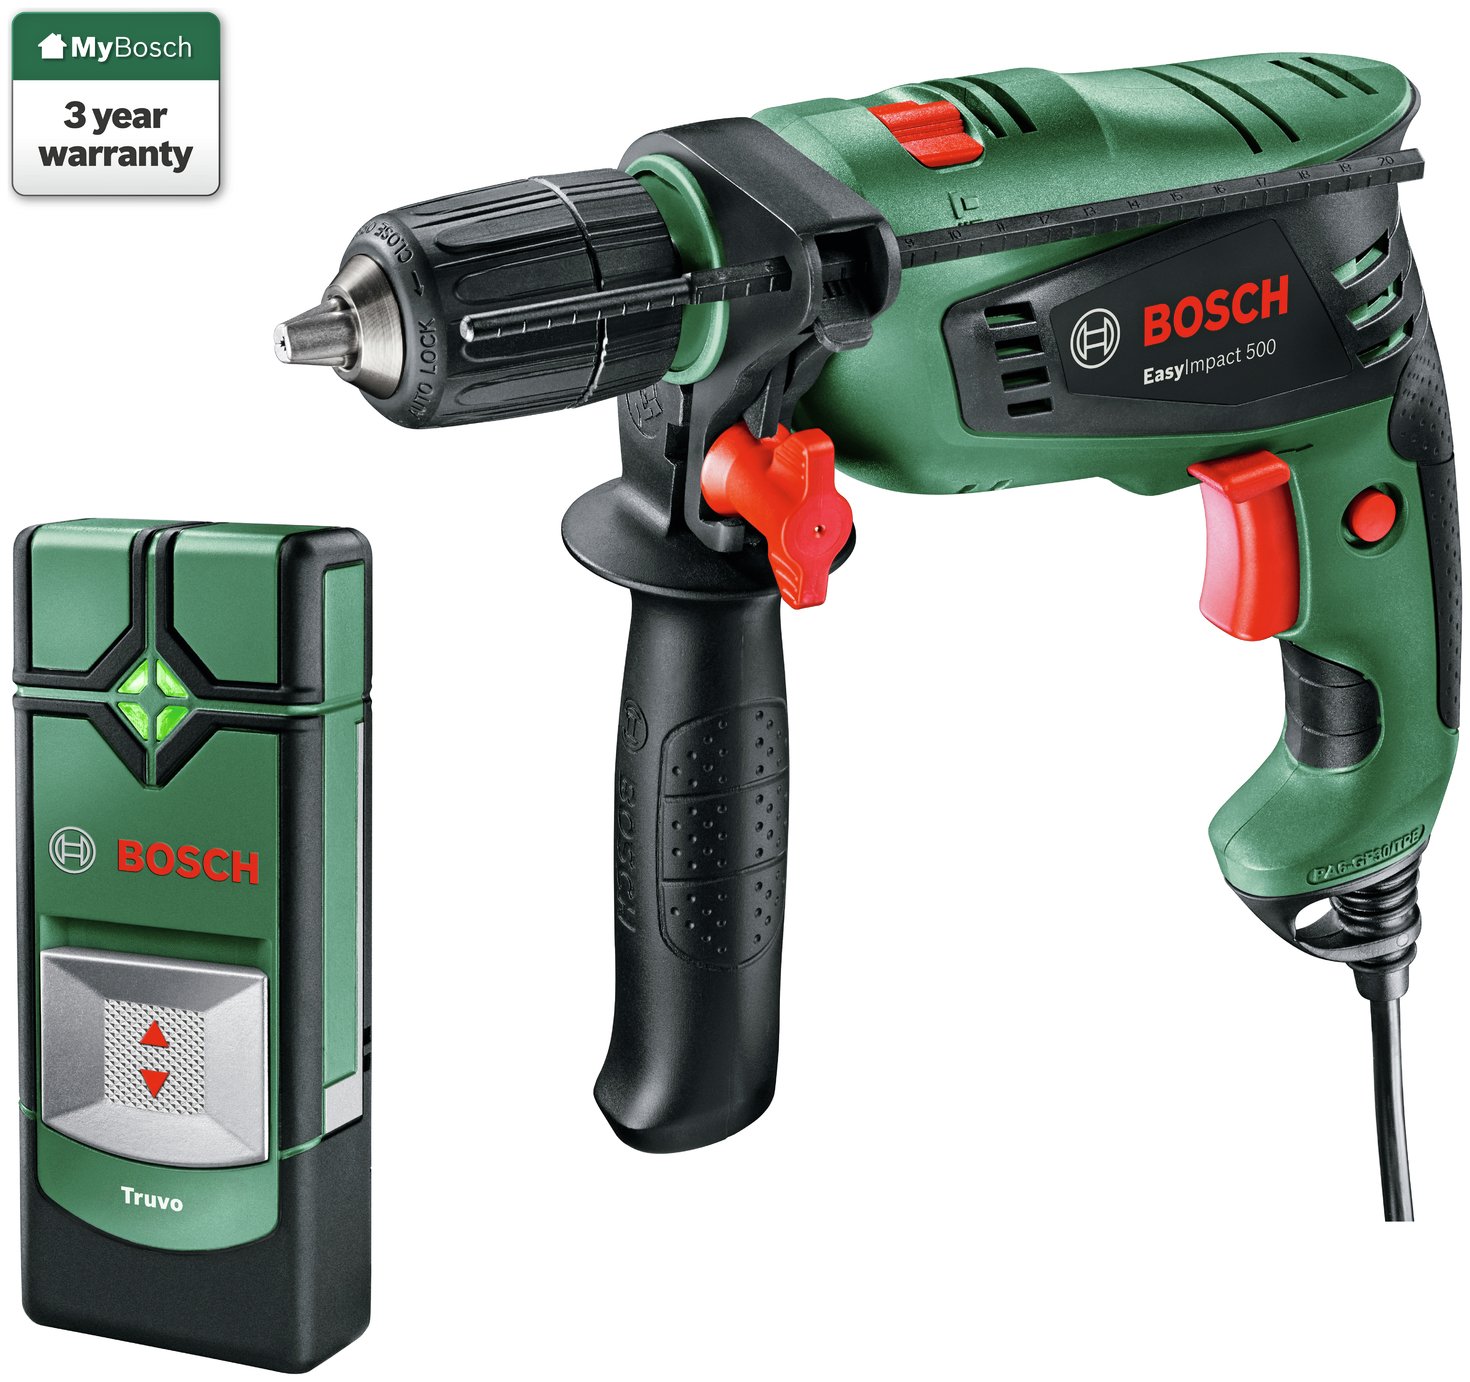 Bosch Easy Impact Corded Drill and Truvo